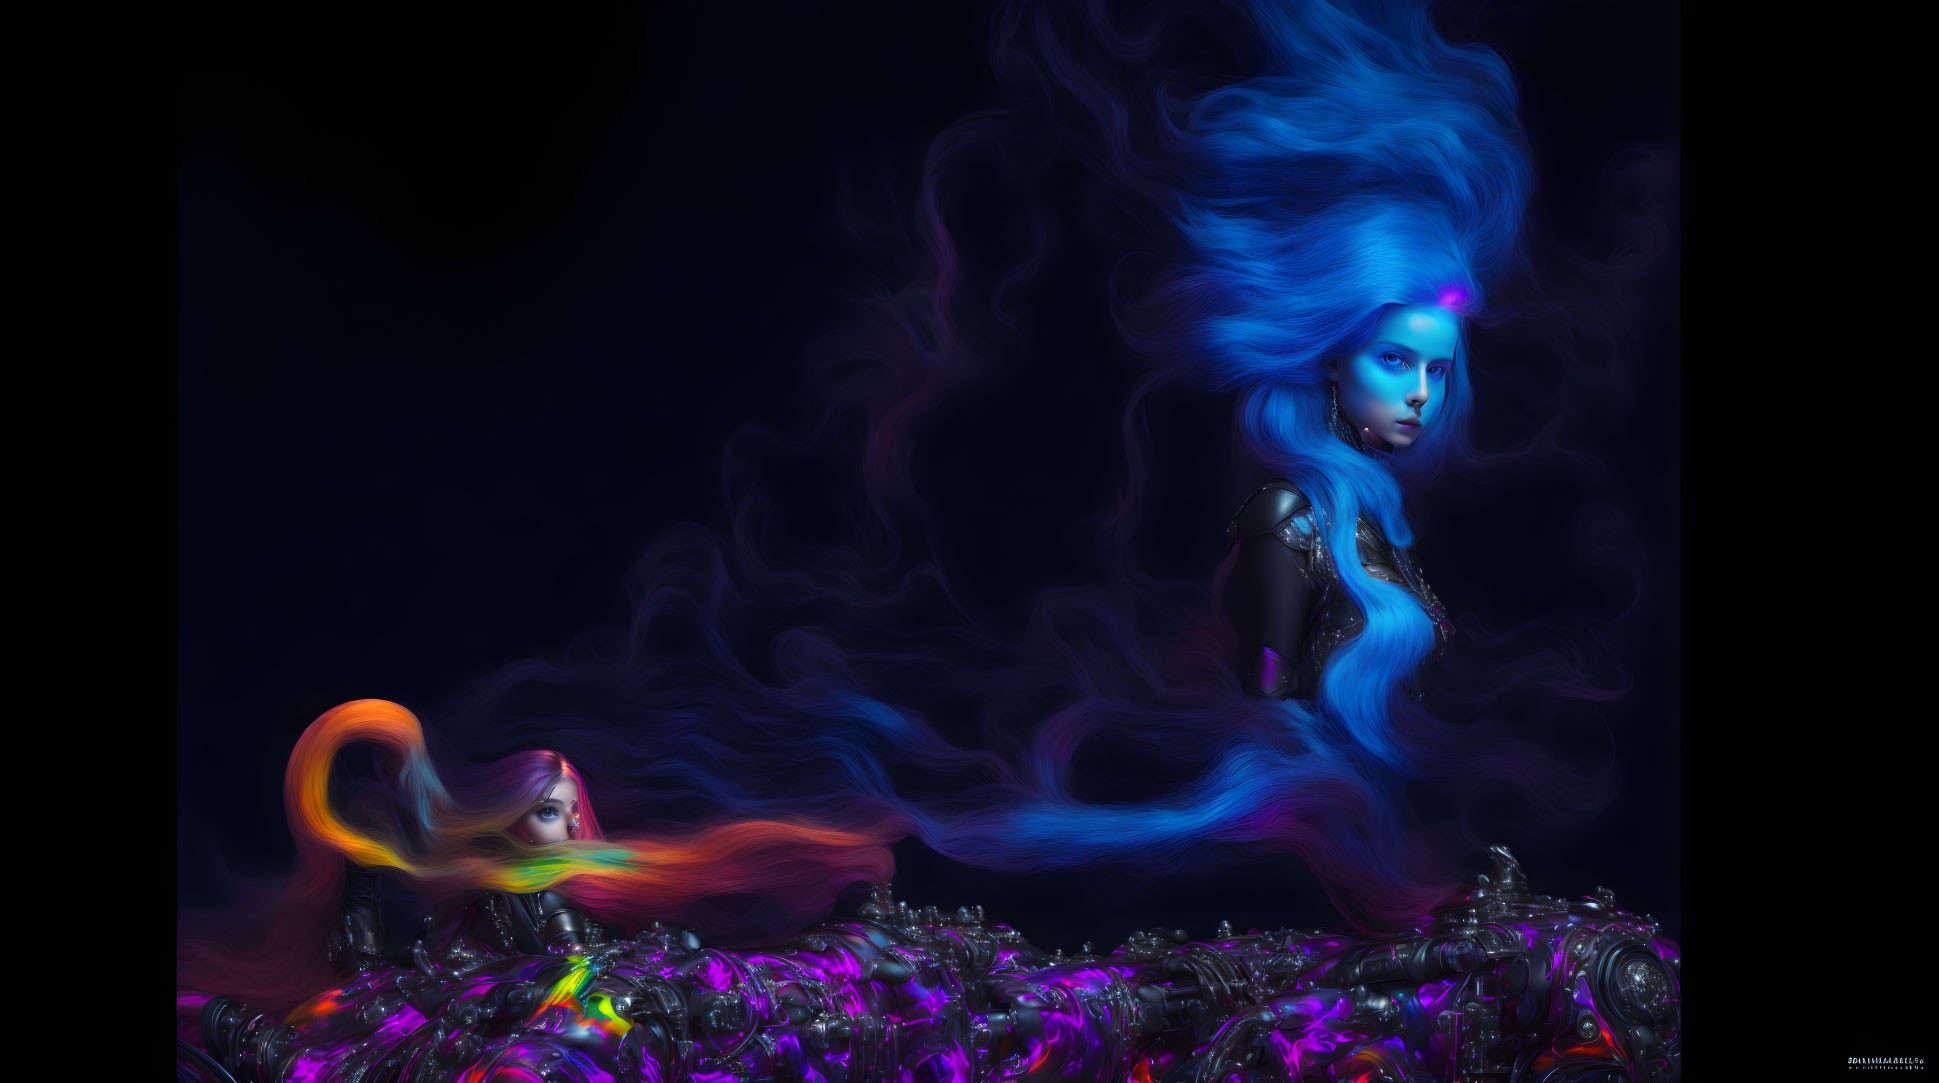 Surreal Artwork: Stylized Characters with Vibrant Hair